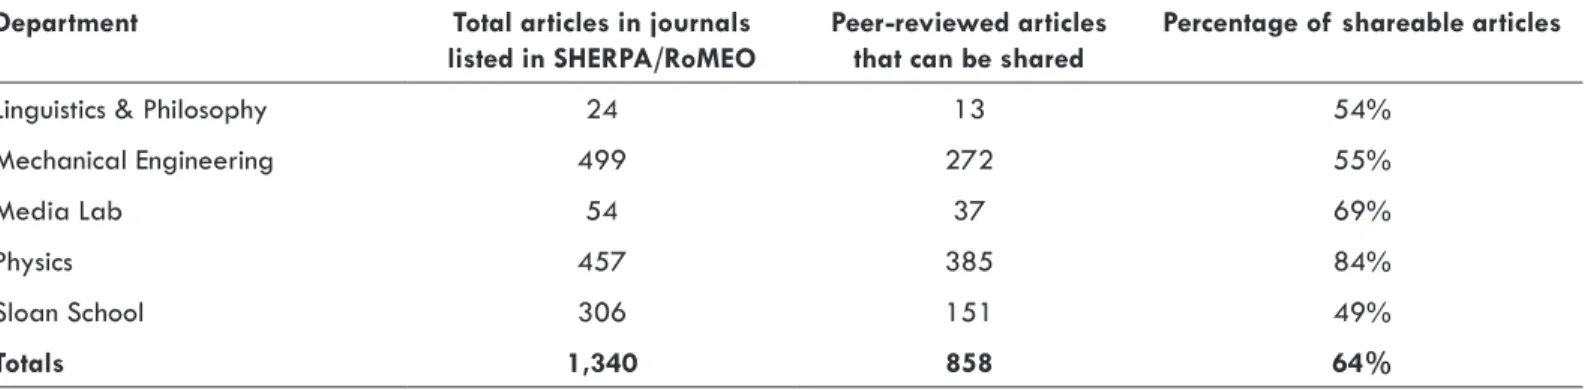 Table 2. Overall Findings: Number and Percentage of Peer-Reviewed Articles that can be Shared